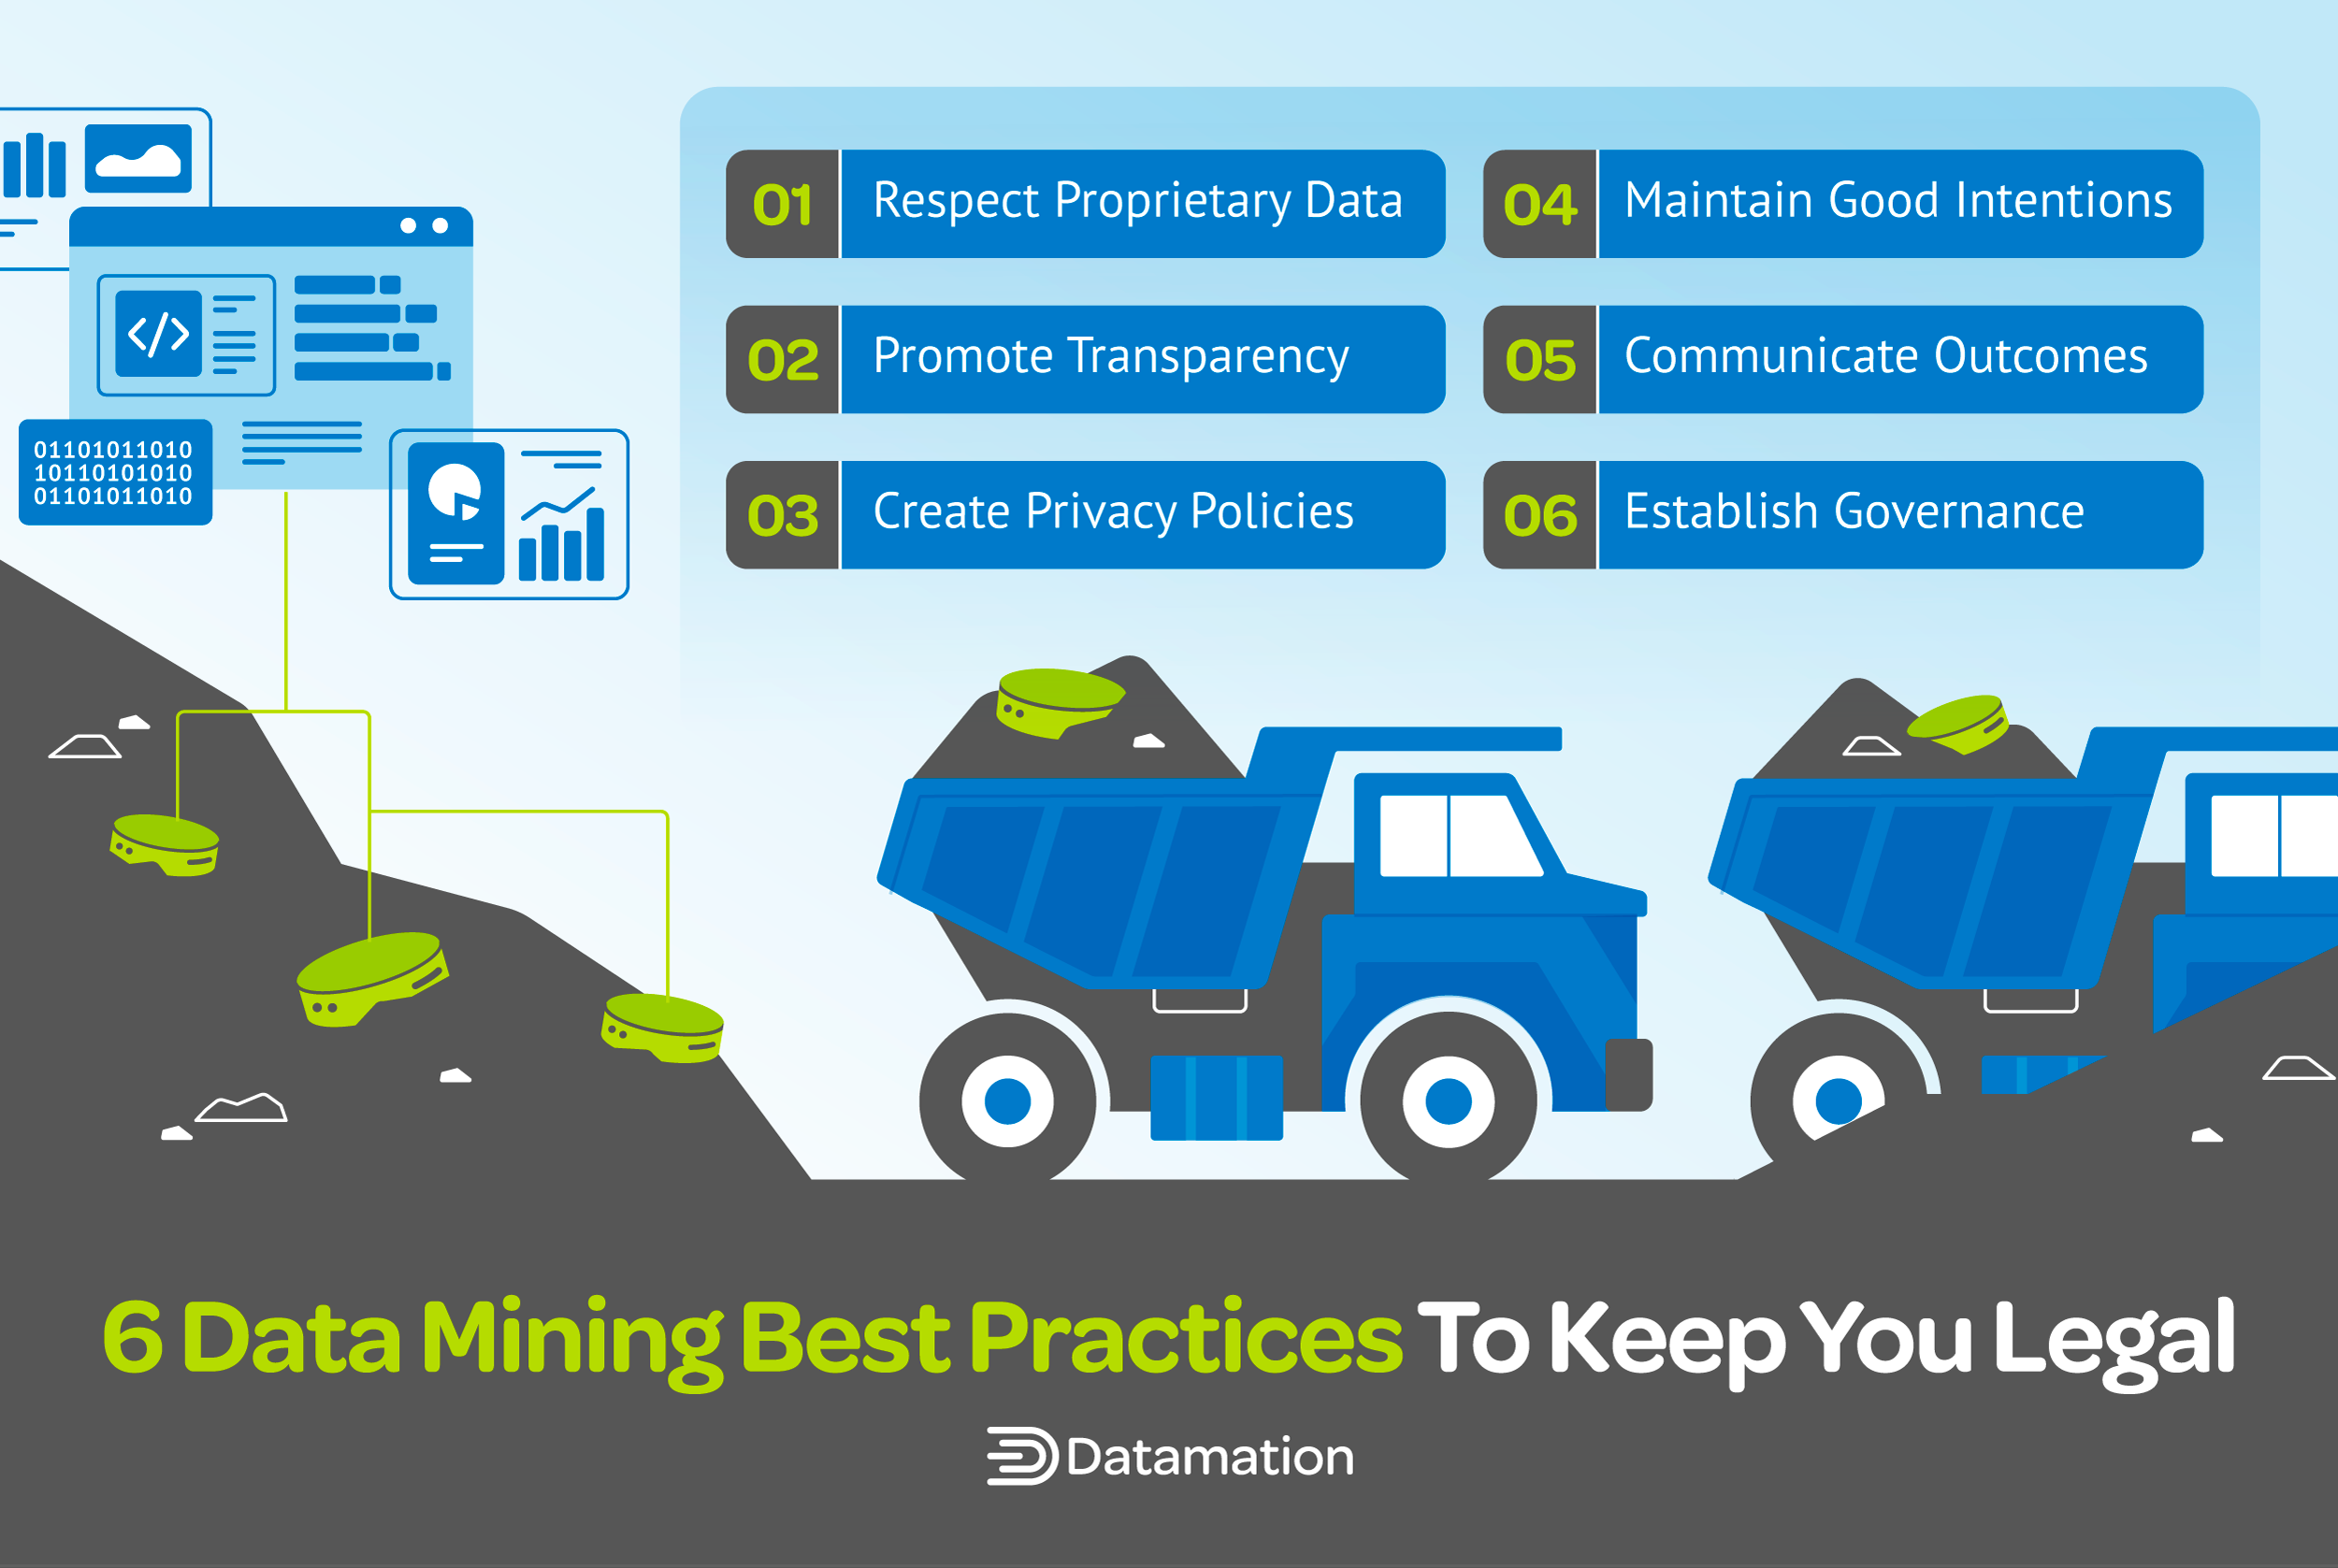 Graphic listing six best practices for data mining to keep organizations safe.